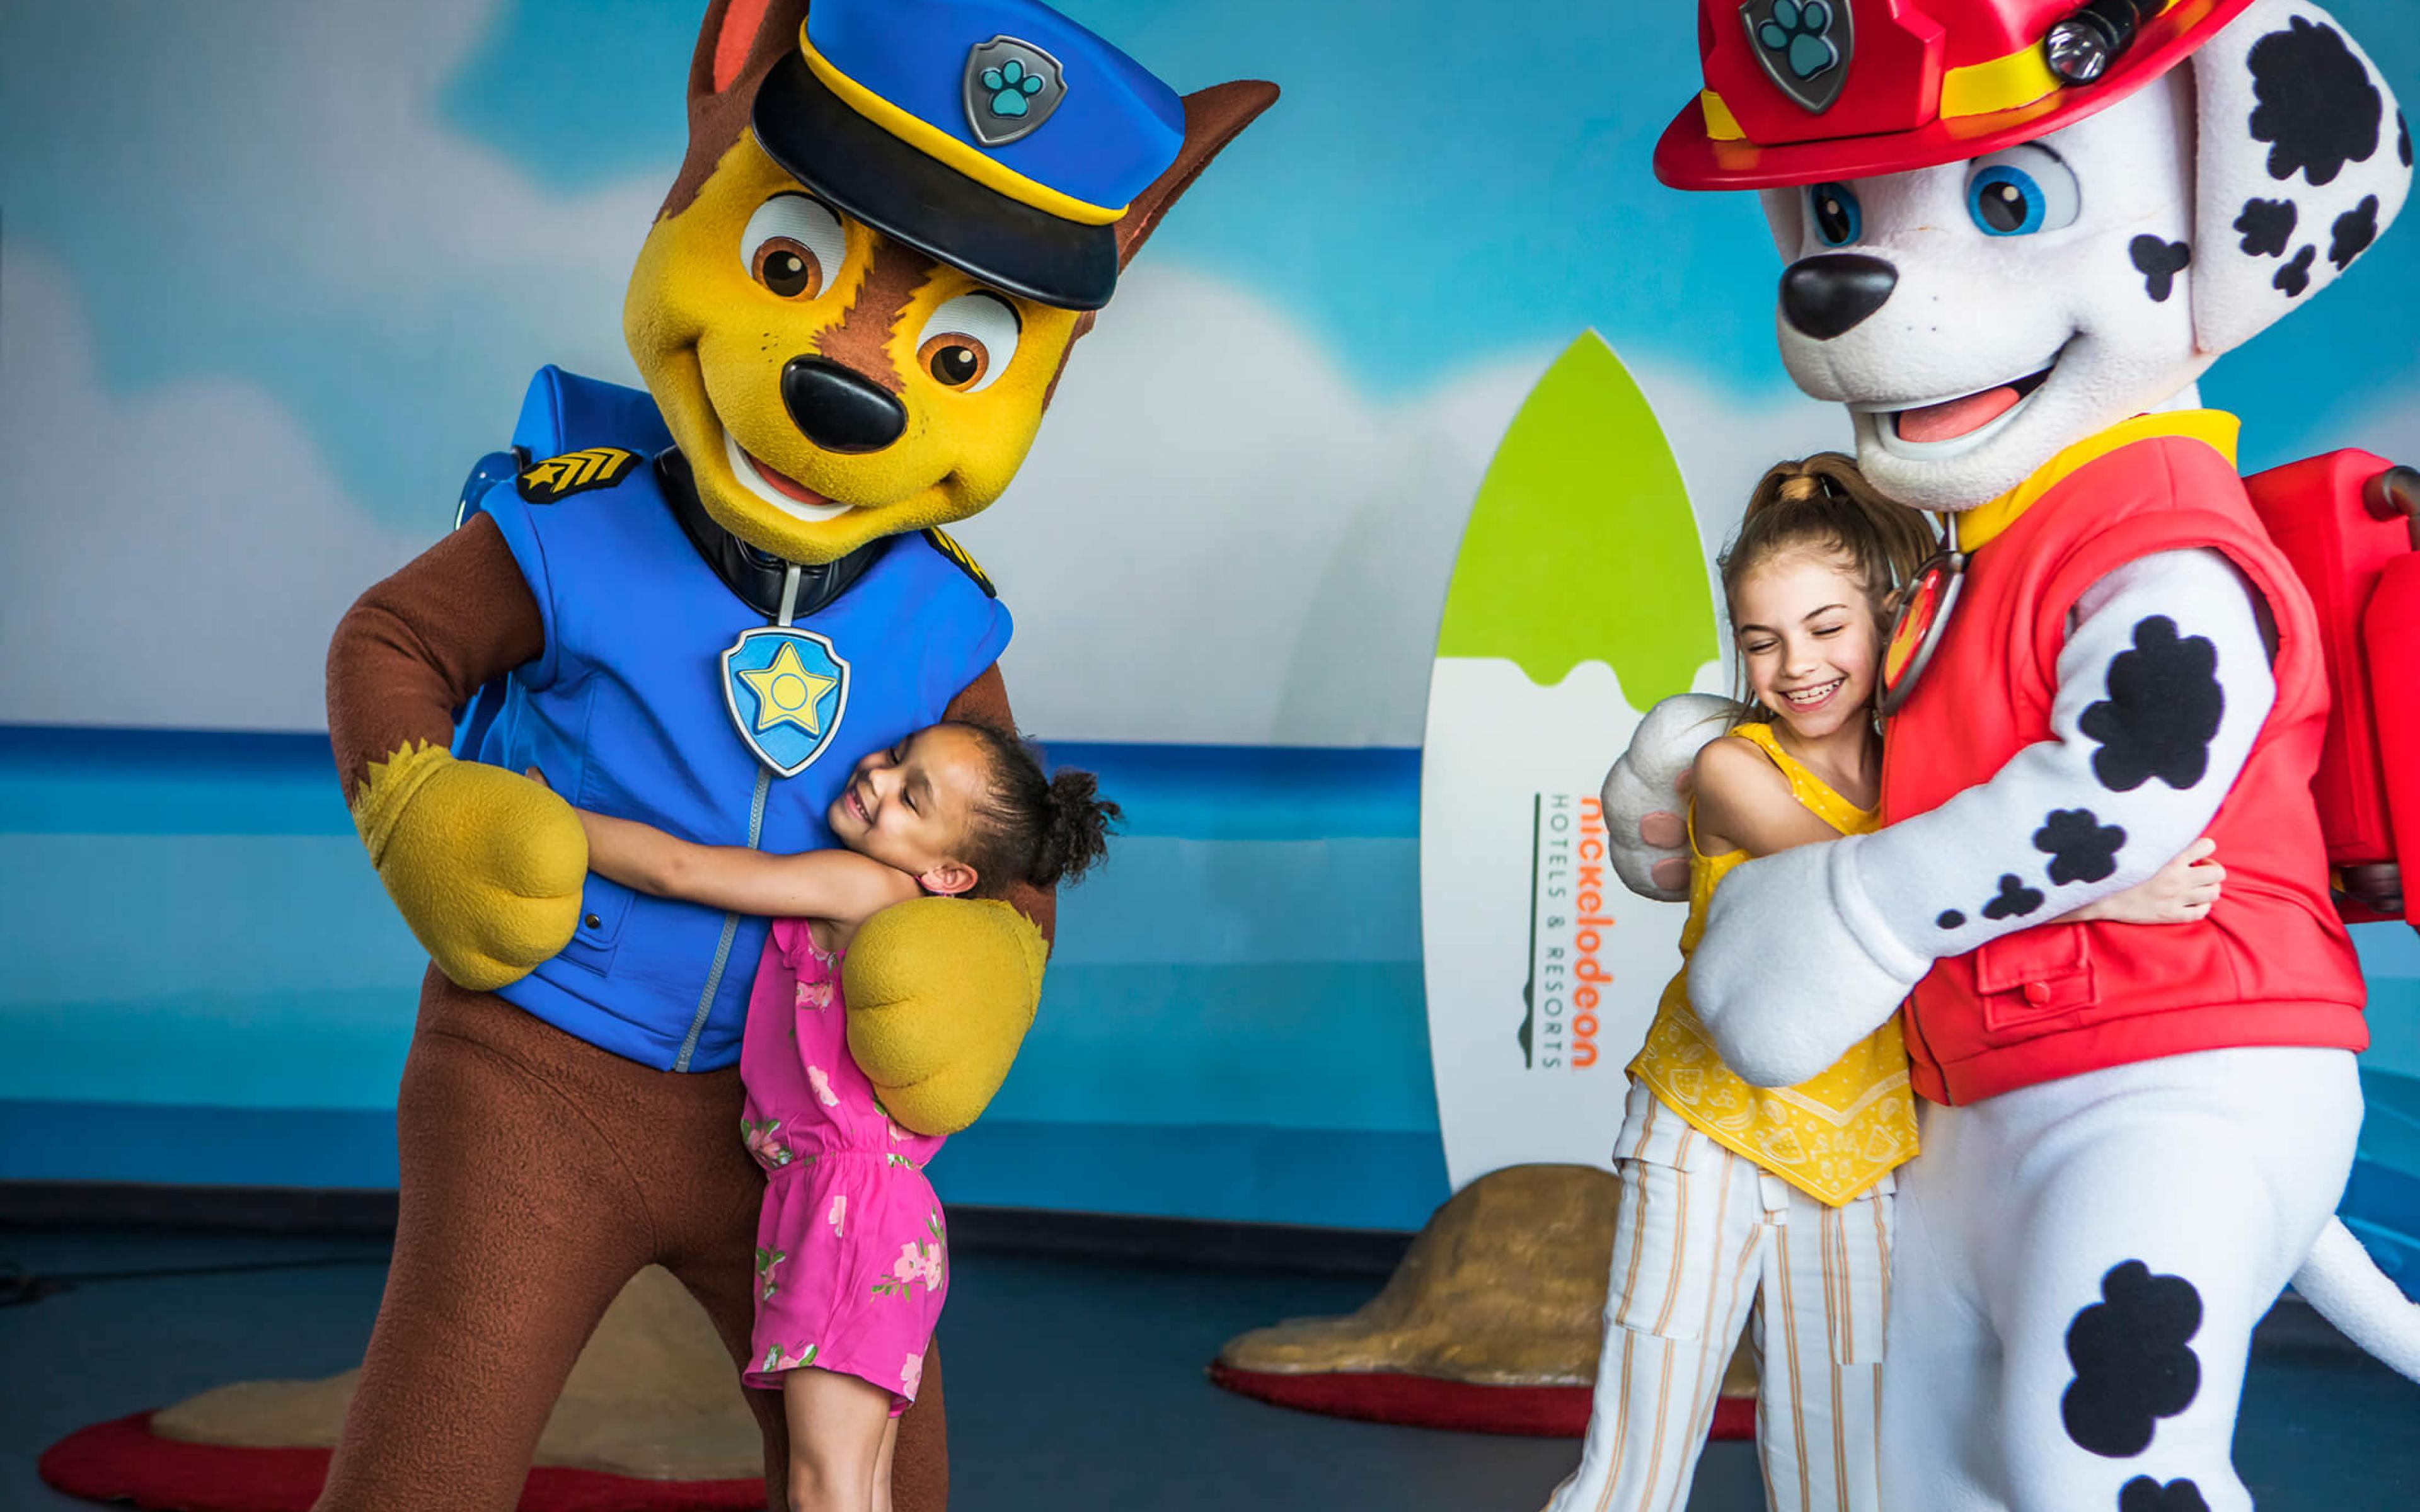 Paw patrol characters posing with child